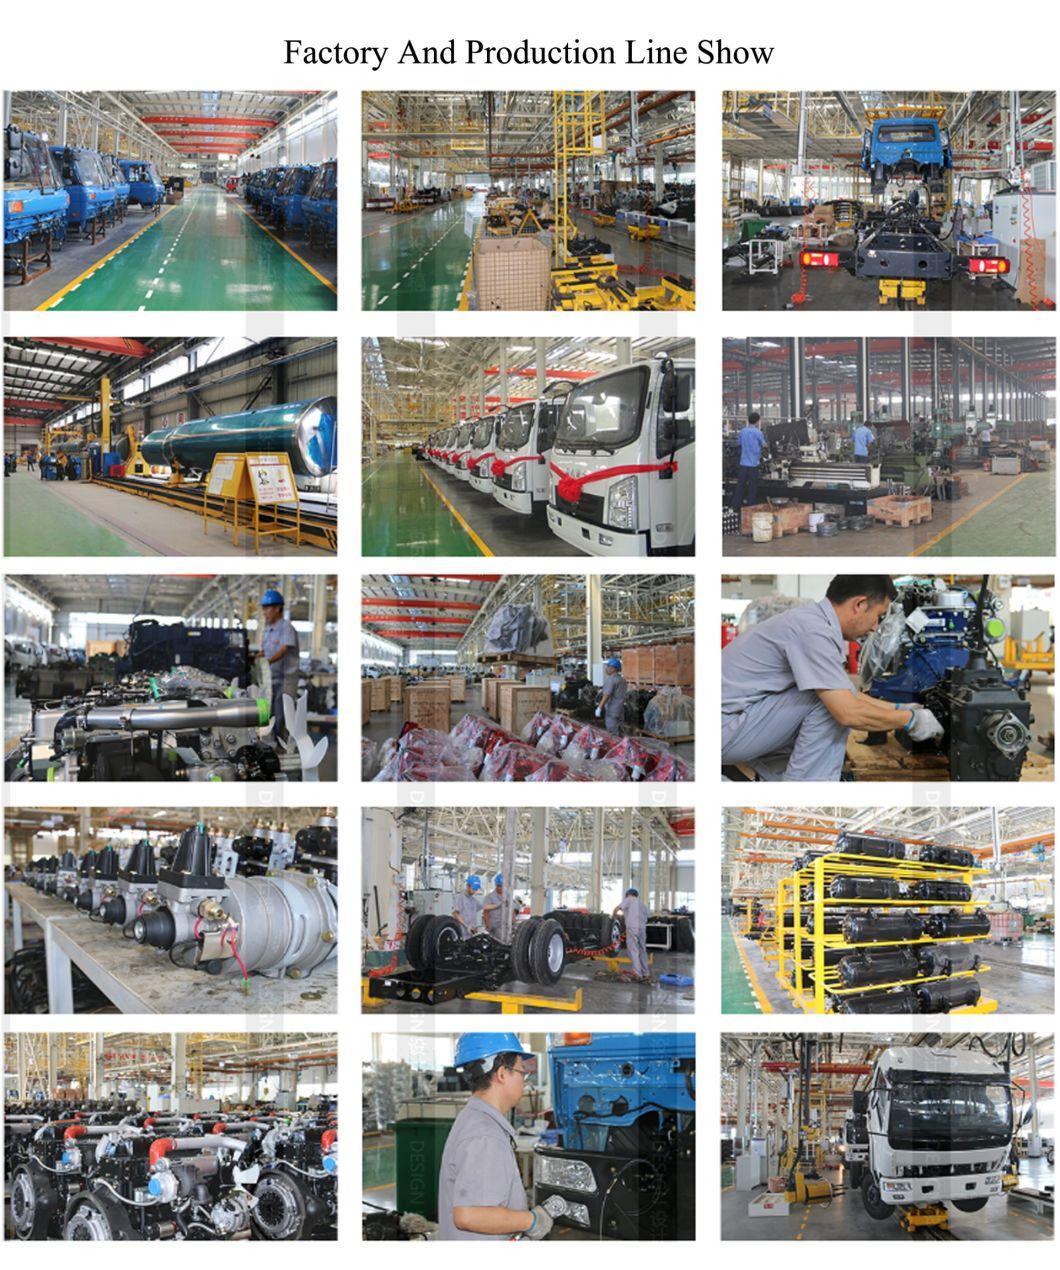 Used Sprinkler Truck Wrecker Truck Refrigerated Truck Truck-Mounted Crane Mixer Truck China′ S Largest Used Base for Special Vehicles (LHD) Stock Car